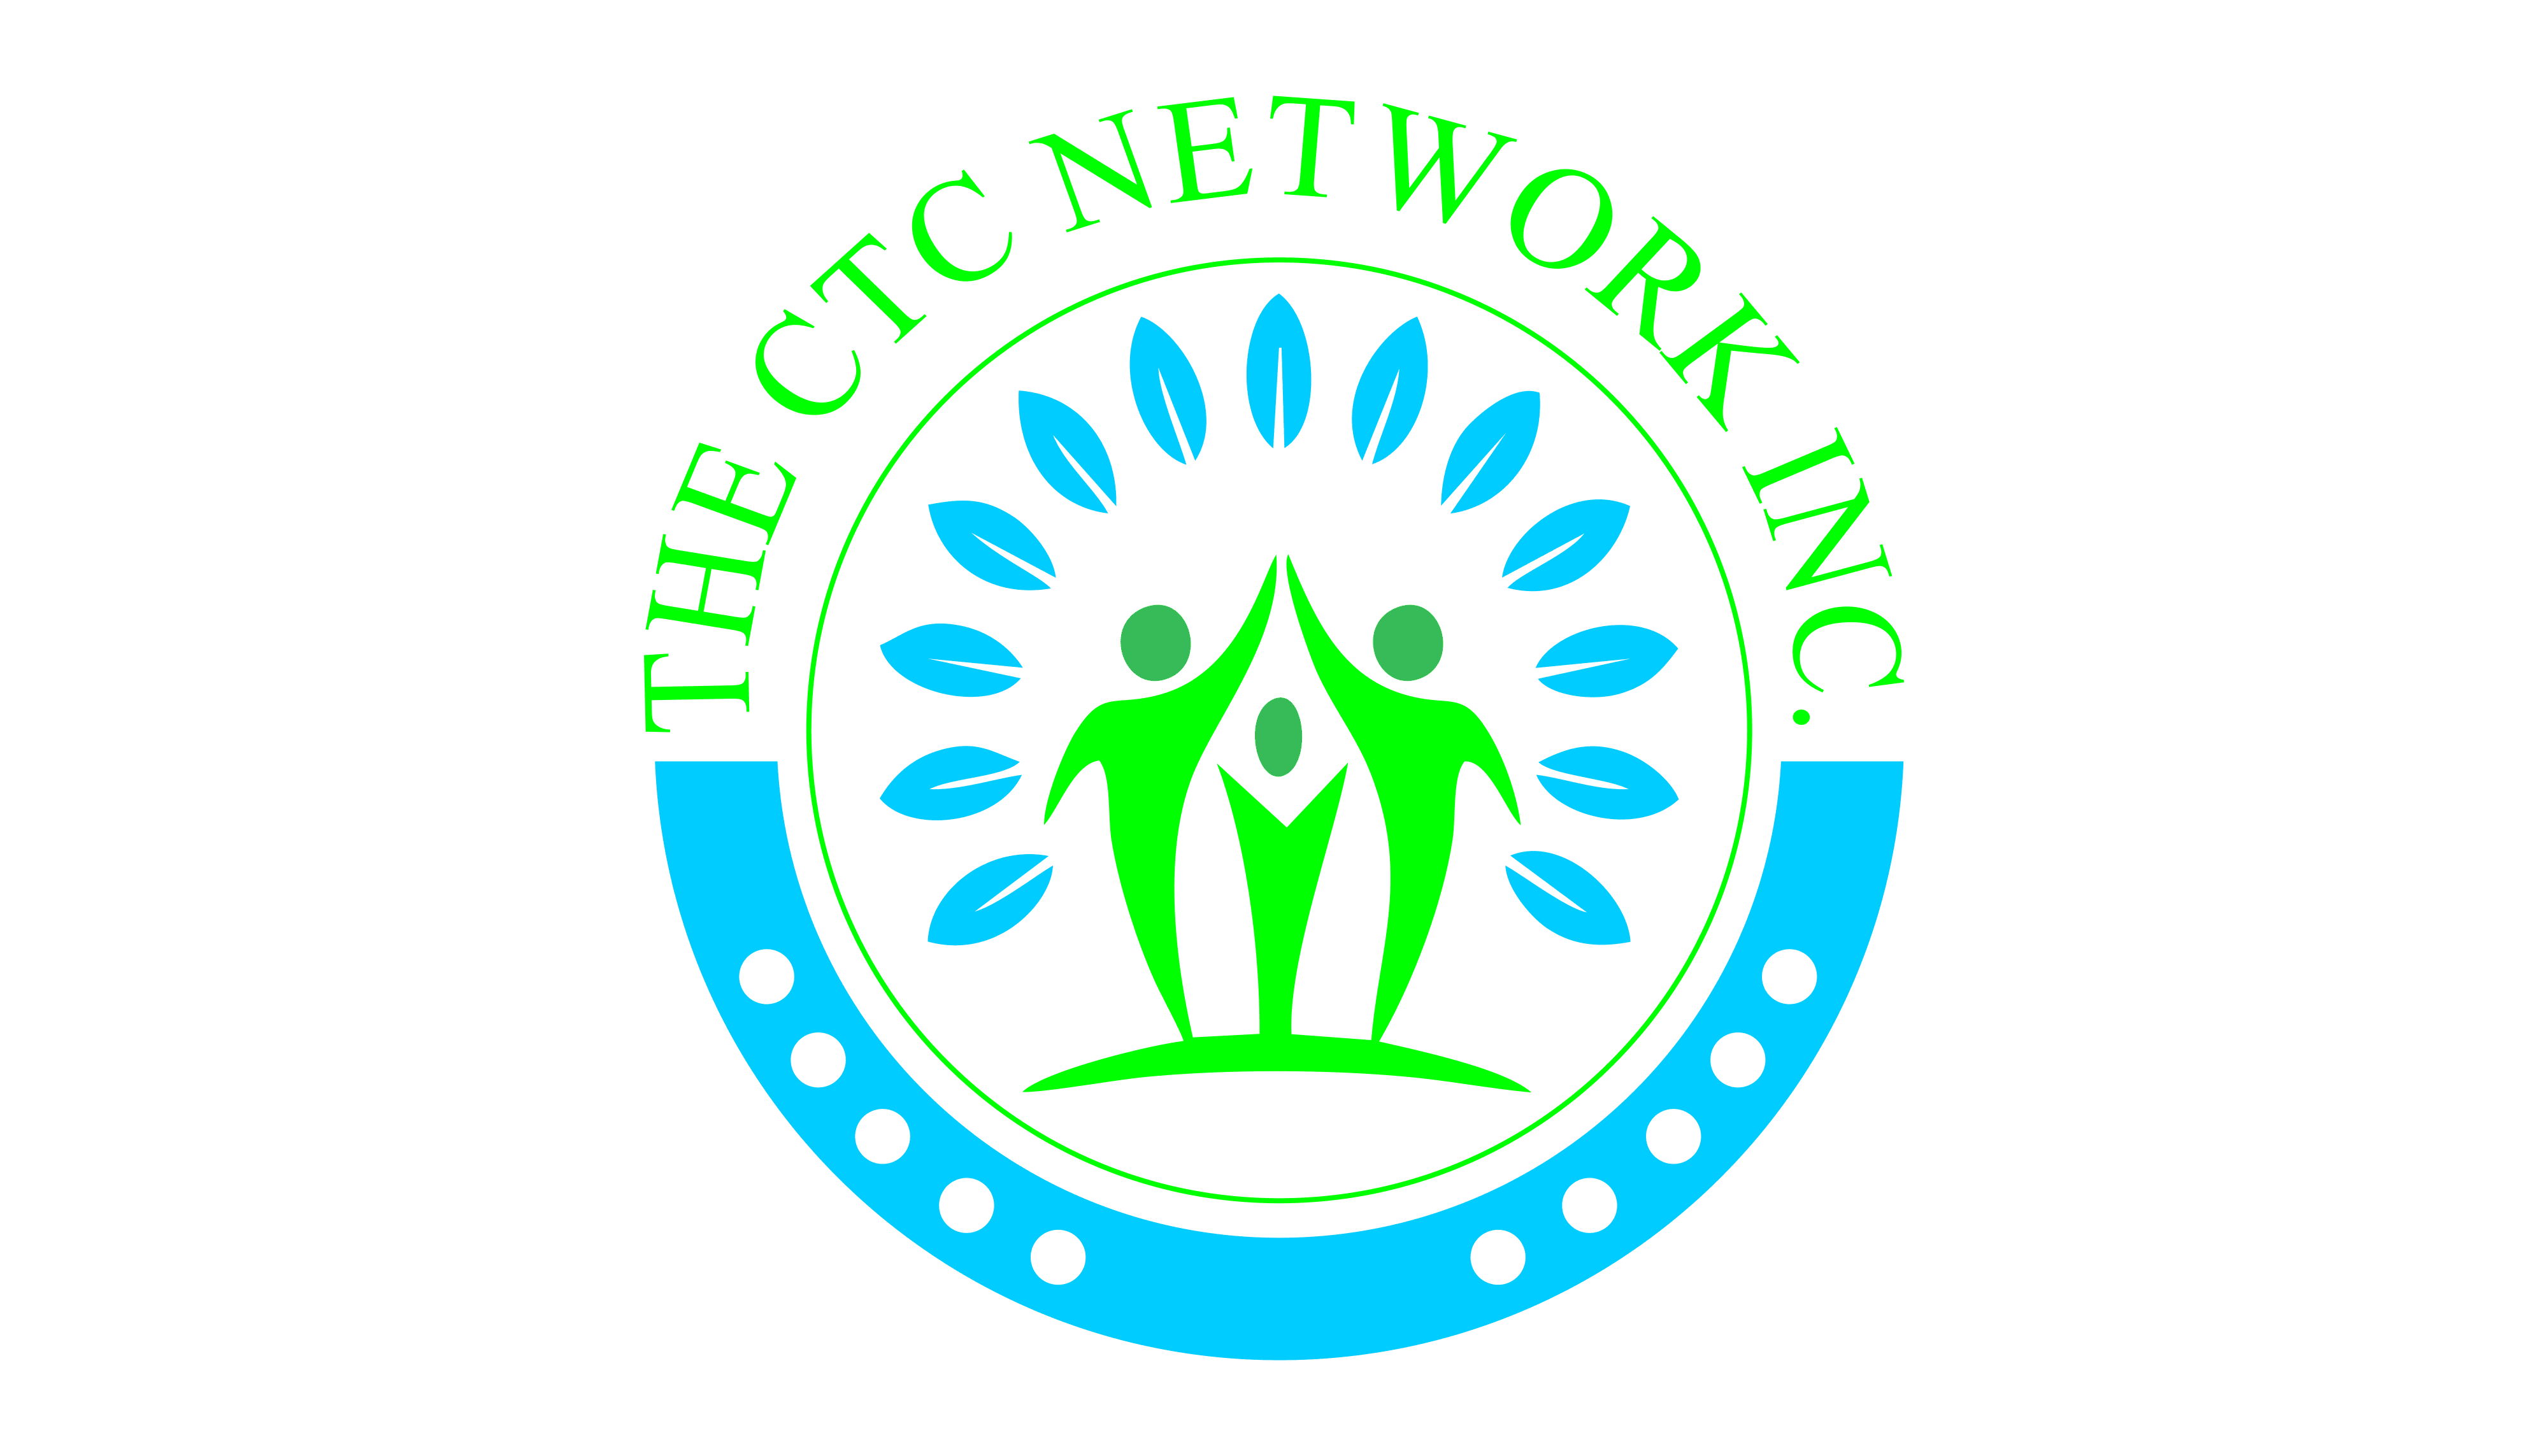 The CTC Network